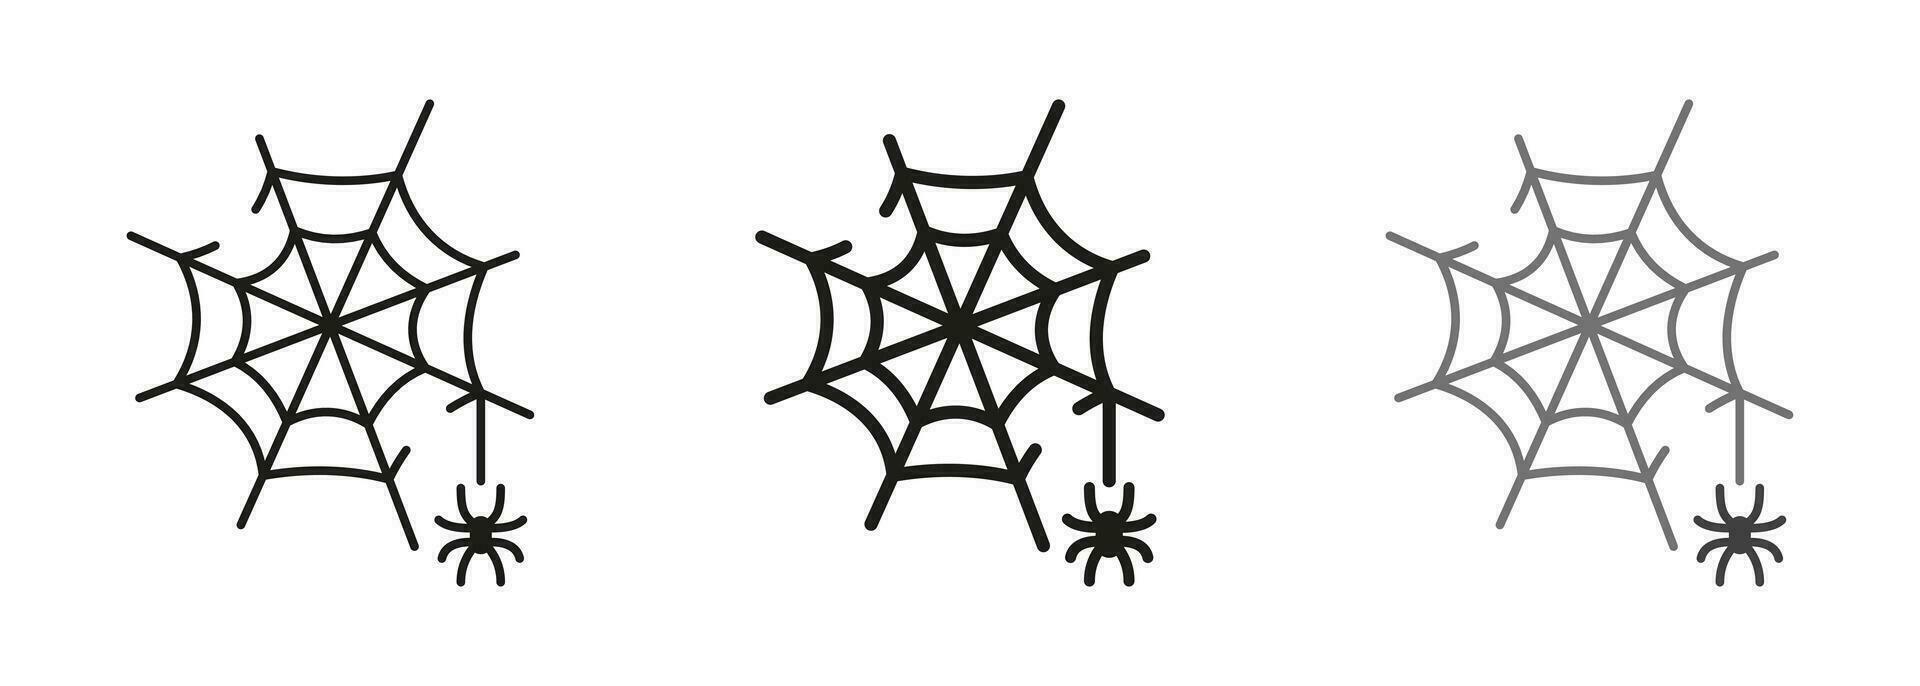 Spiderweb Line and Silhouette Icon Set. Spooky Spider Web, Halloween Decoration Pictogram. Fear Cobweb Trap with Spider on Thread Symbol Collection. Isolated Vector Illustration.